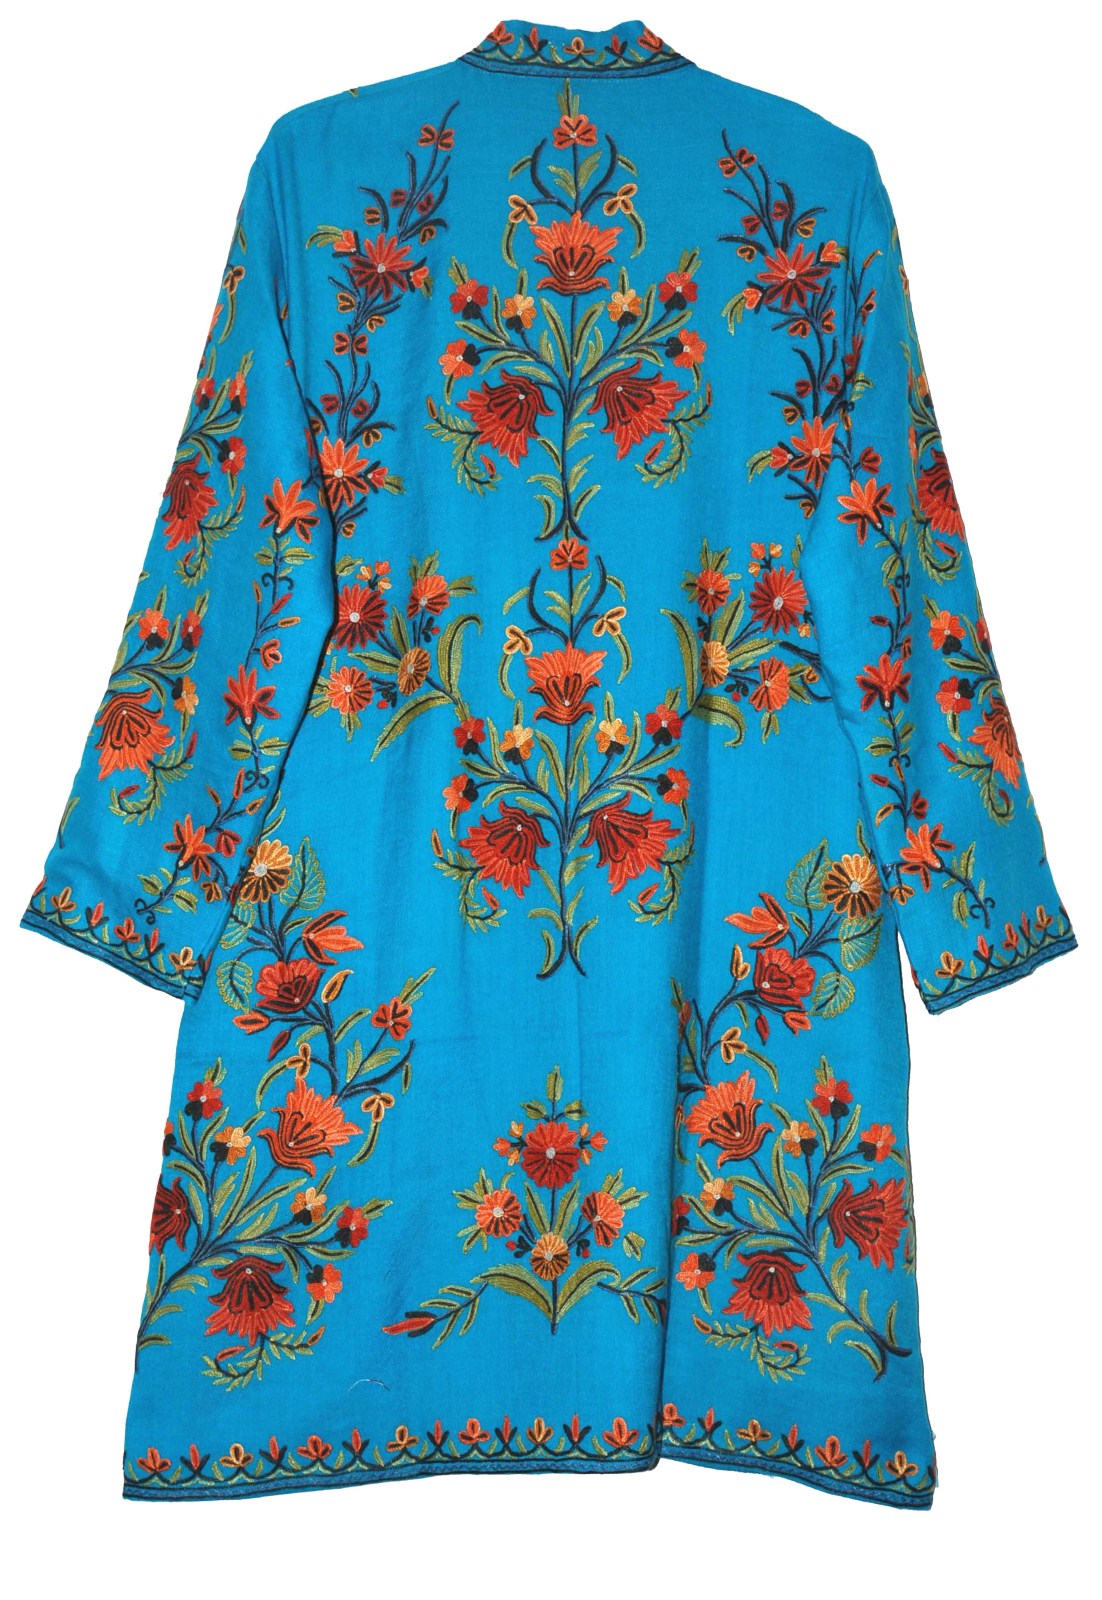 Woolen Embroidered Coat Long Jacket Sky Blue, Rust Embroidery #AO-175